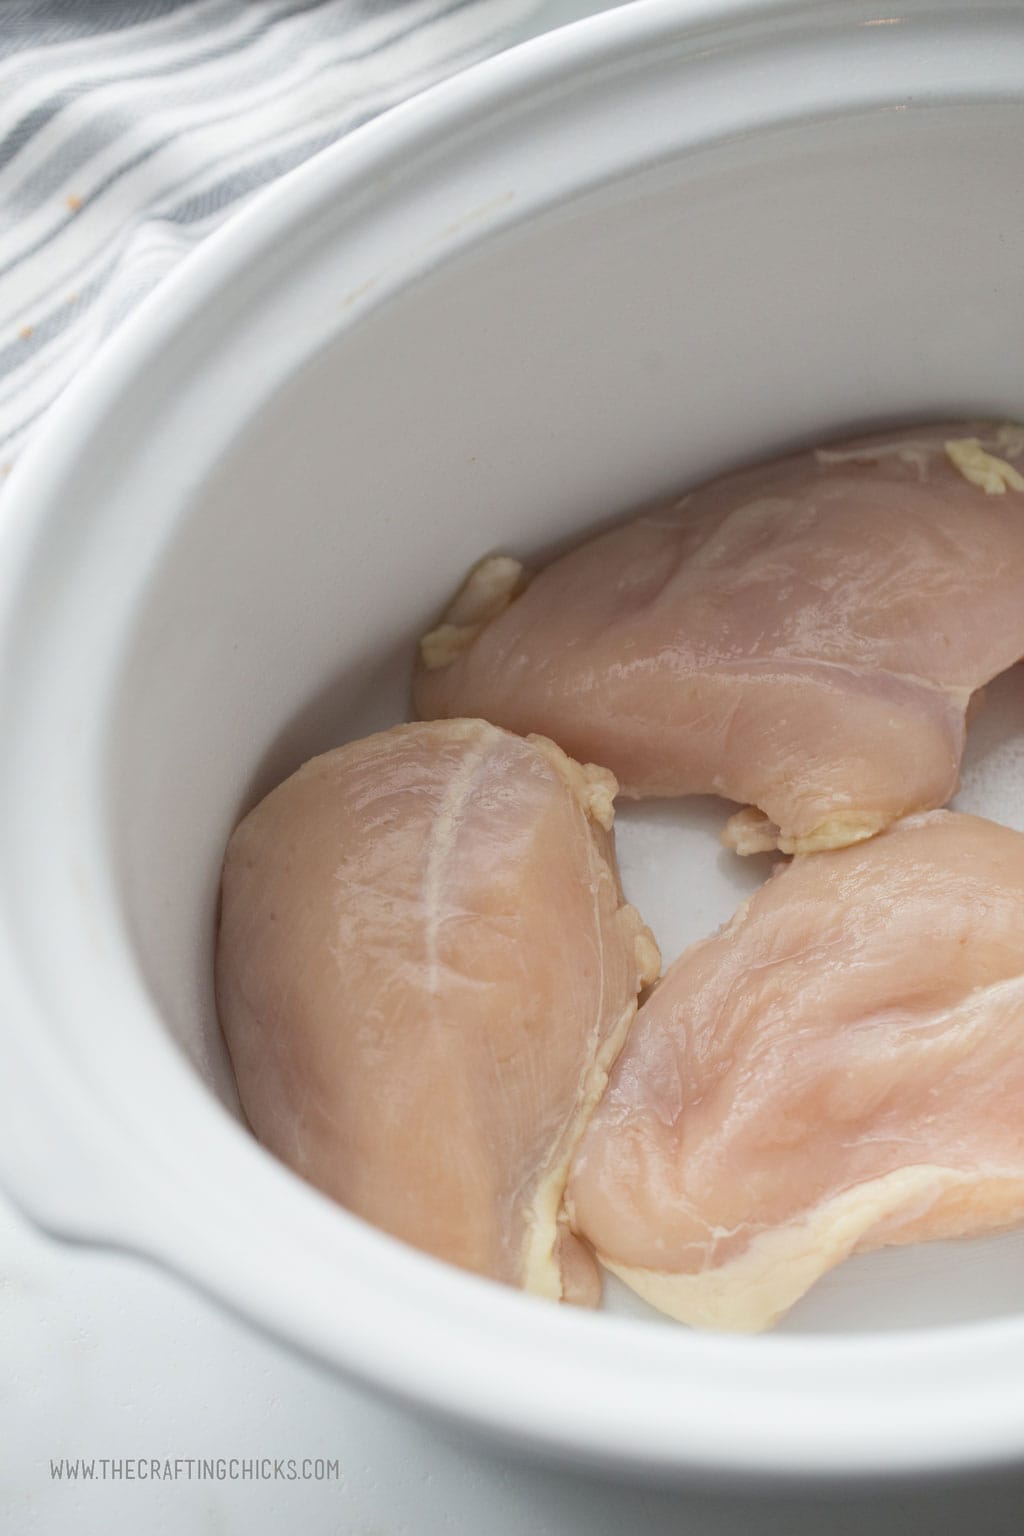 Raw Chicken breasts in a crockpot ready to be cooked.